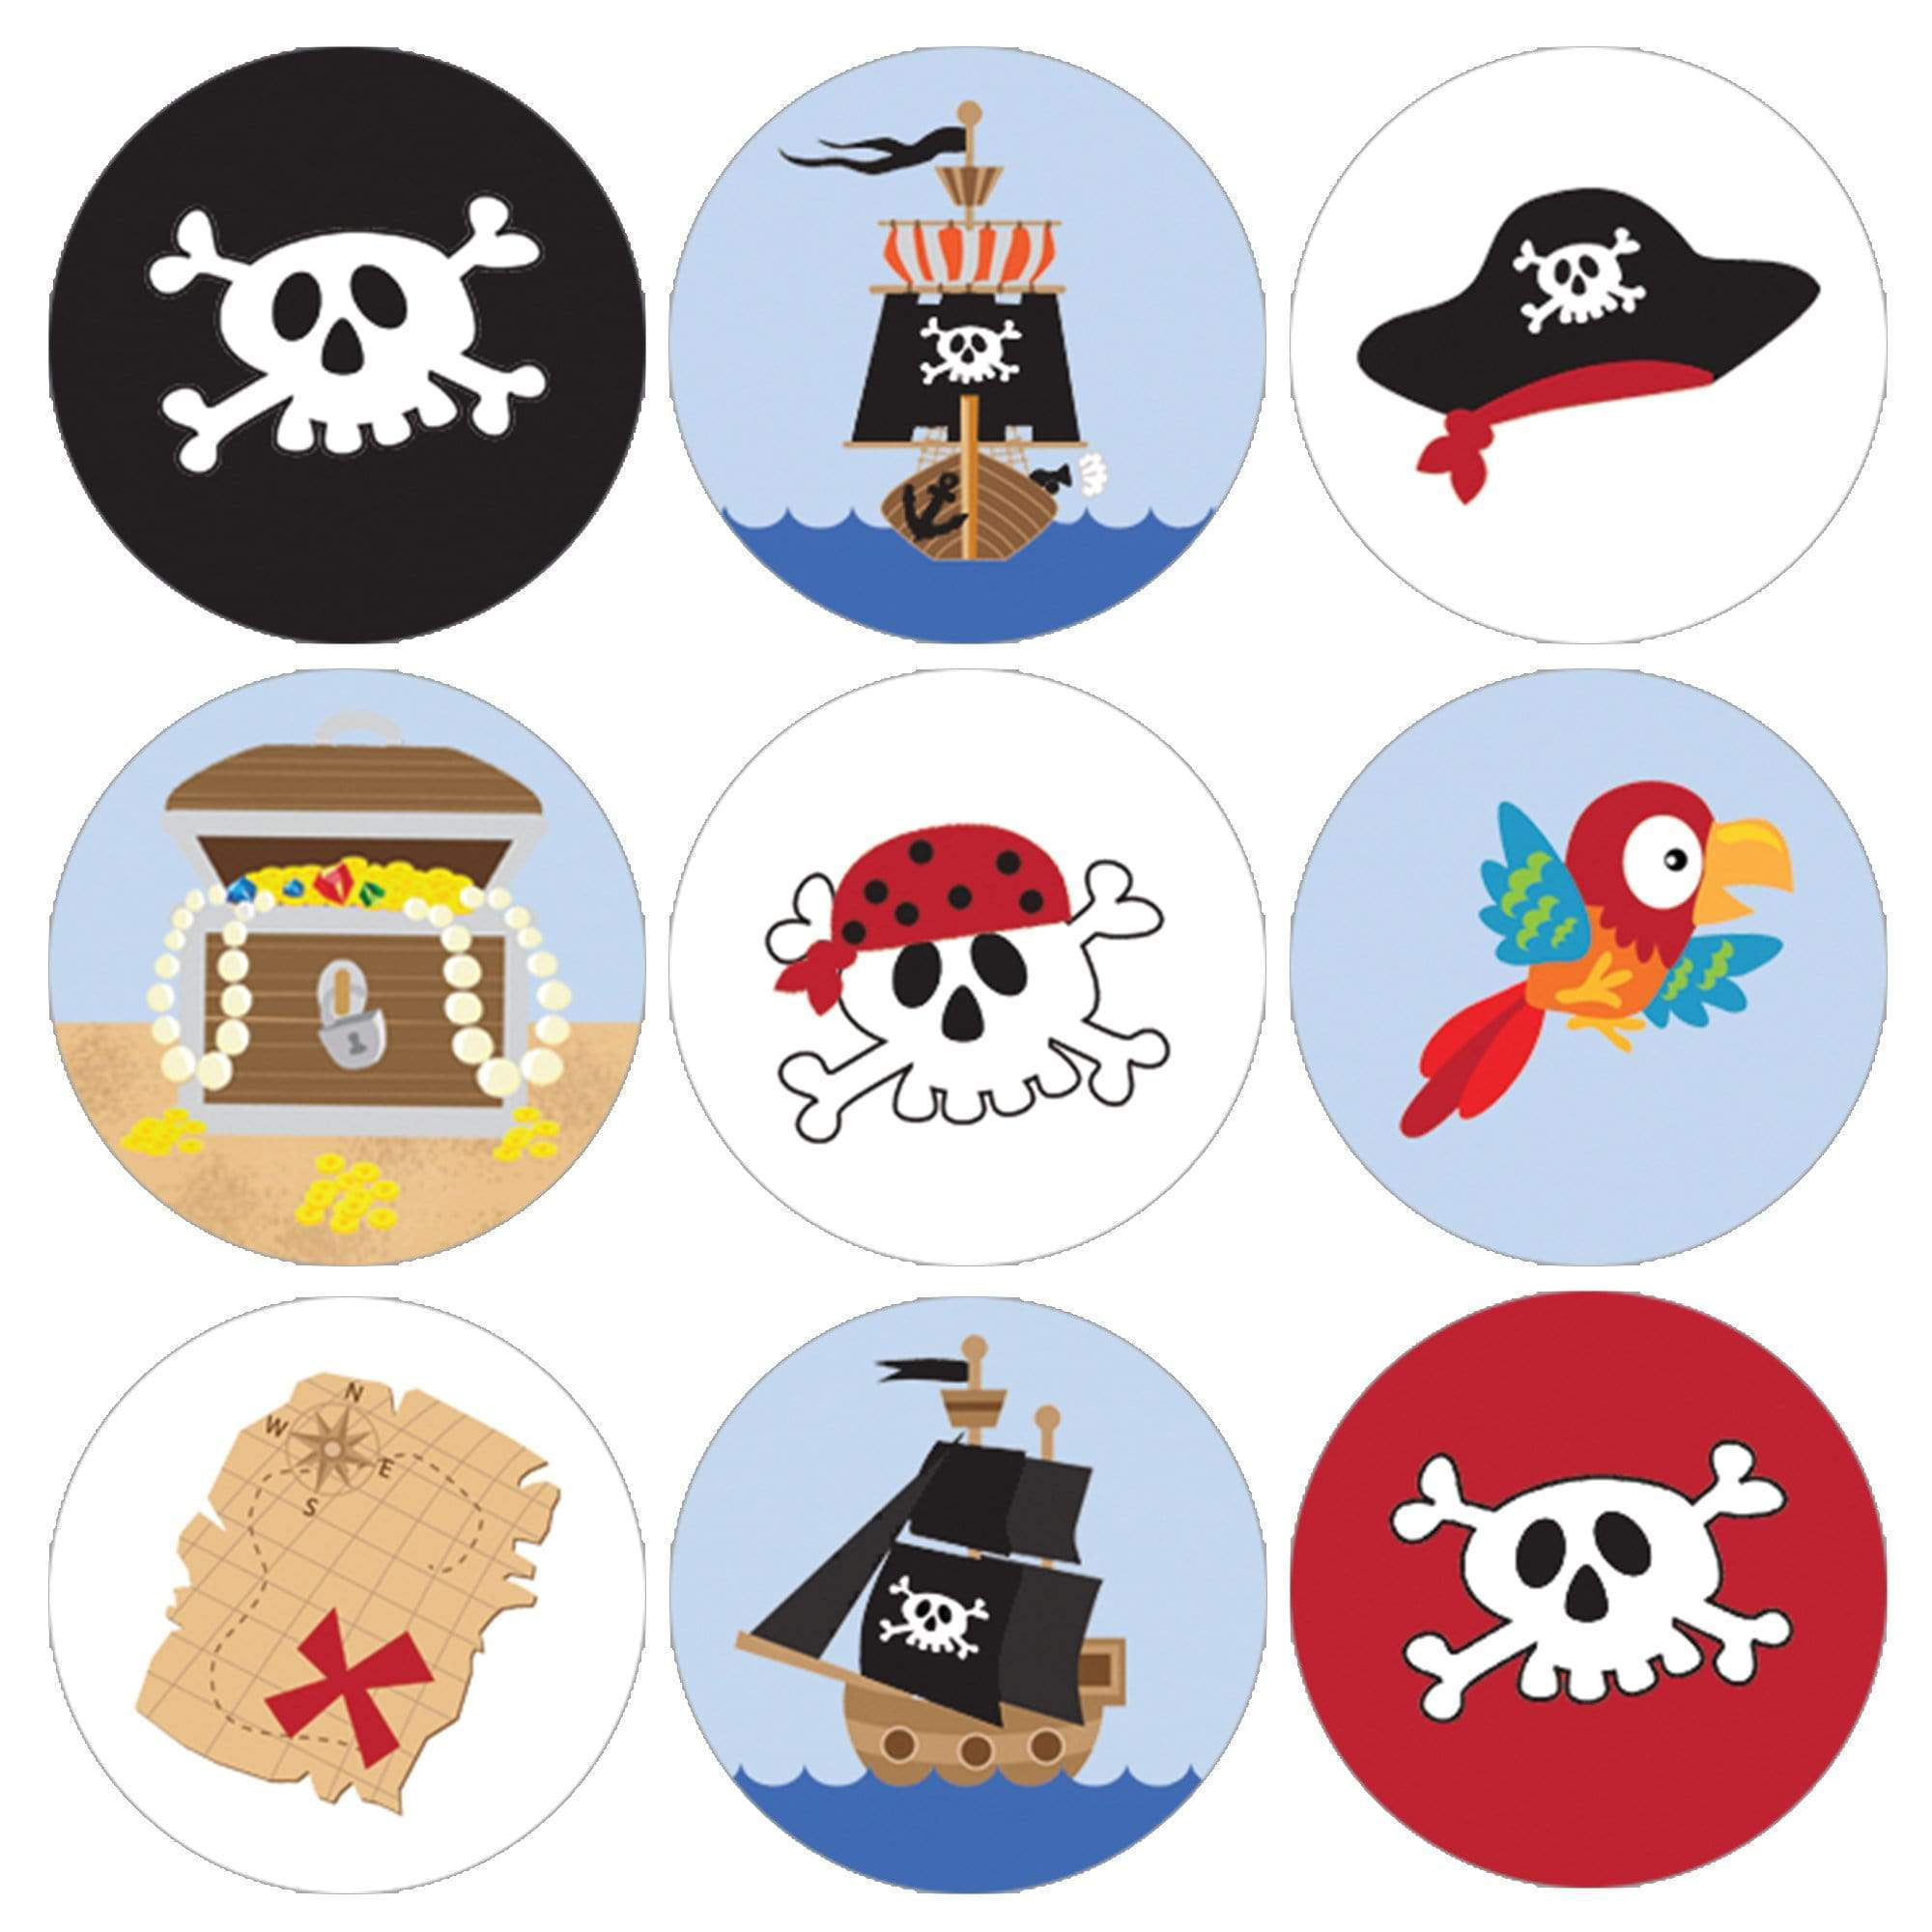 DISNEY PIRATES OF THE CARIBBEAN STICKERS PARTY FAVORS 20 SHEETS NEW FREE SHIP 